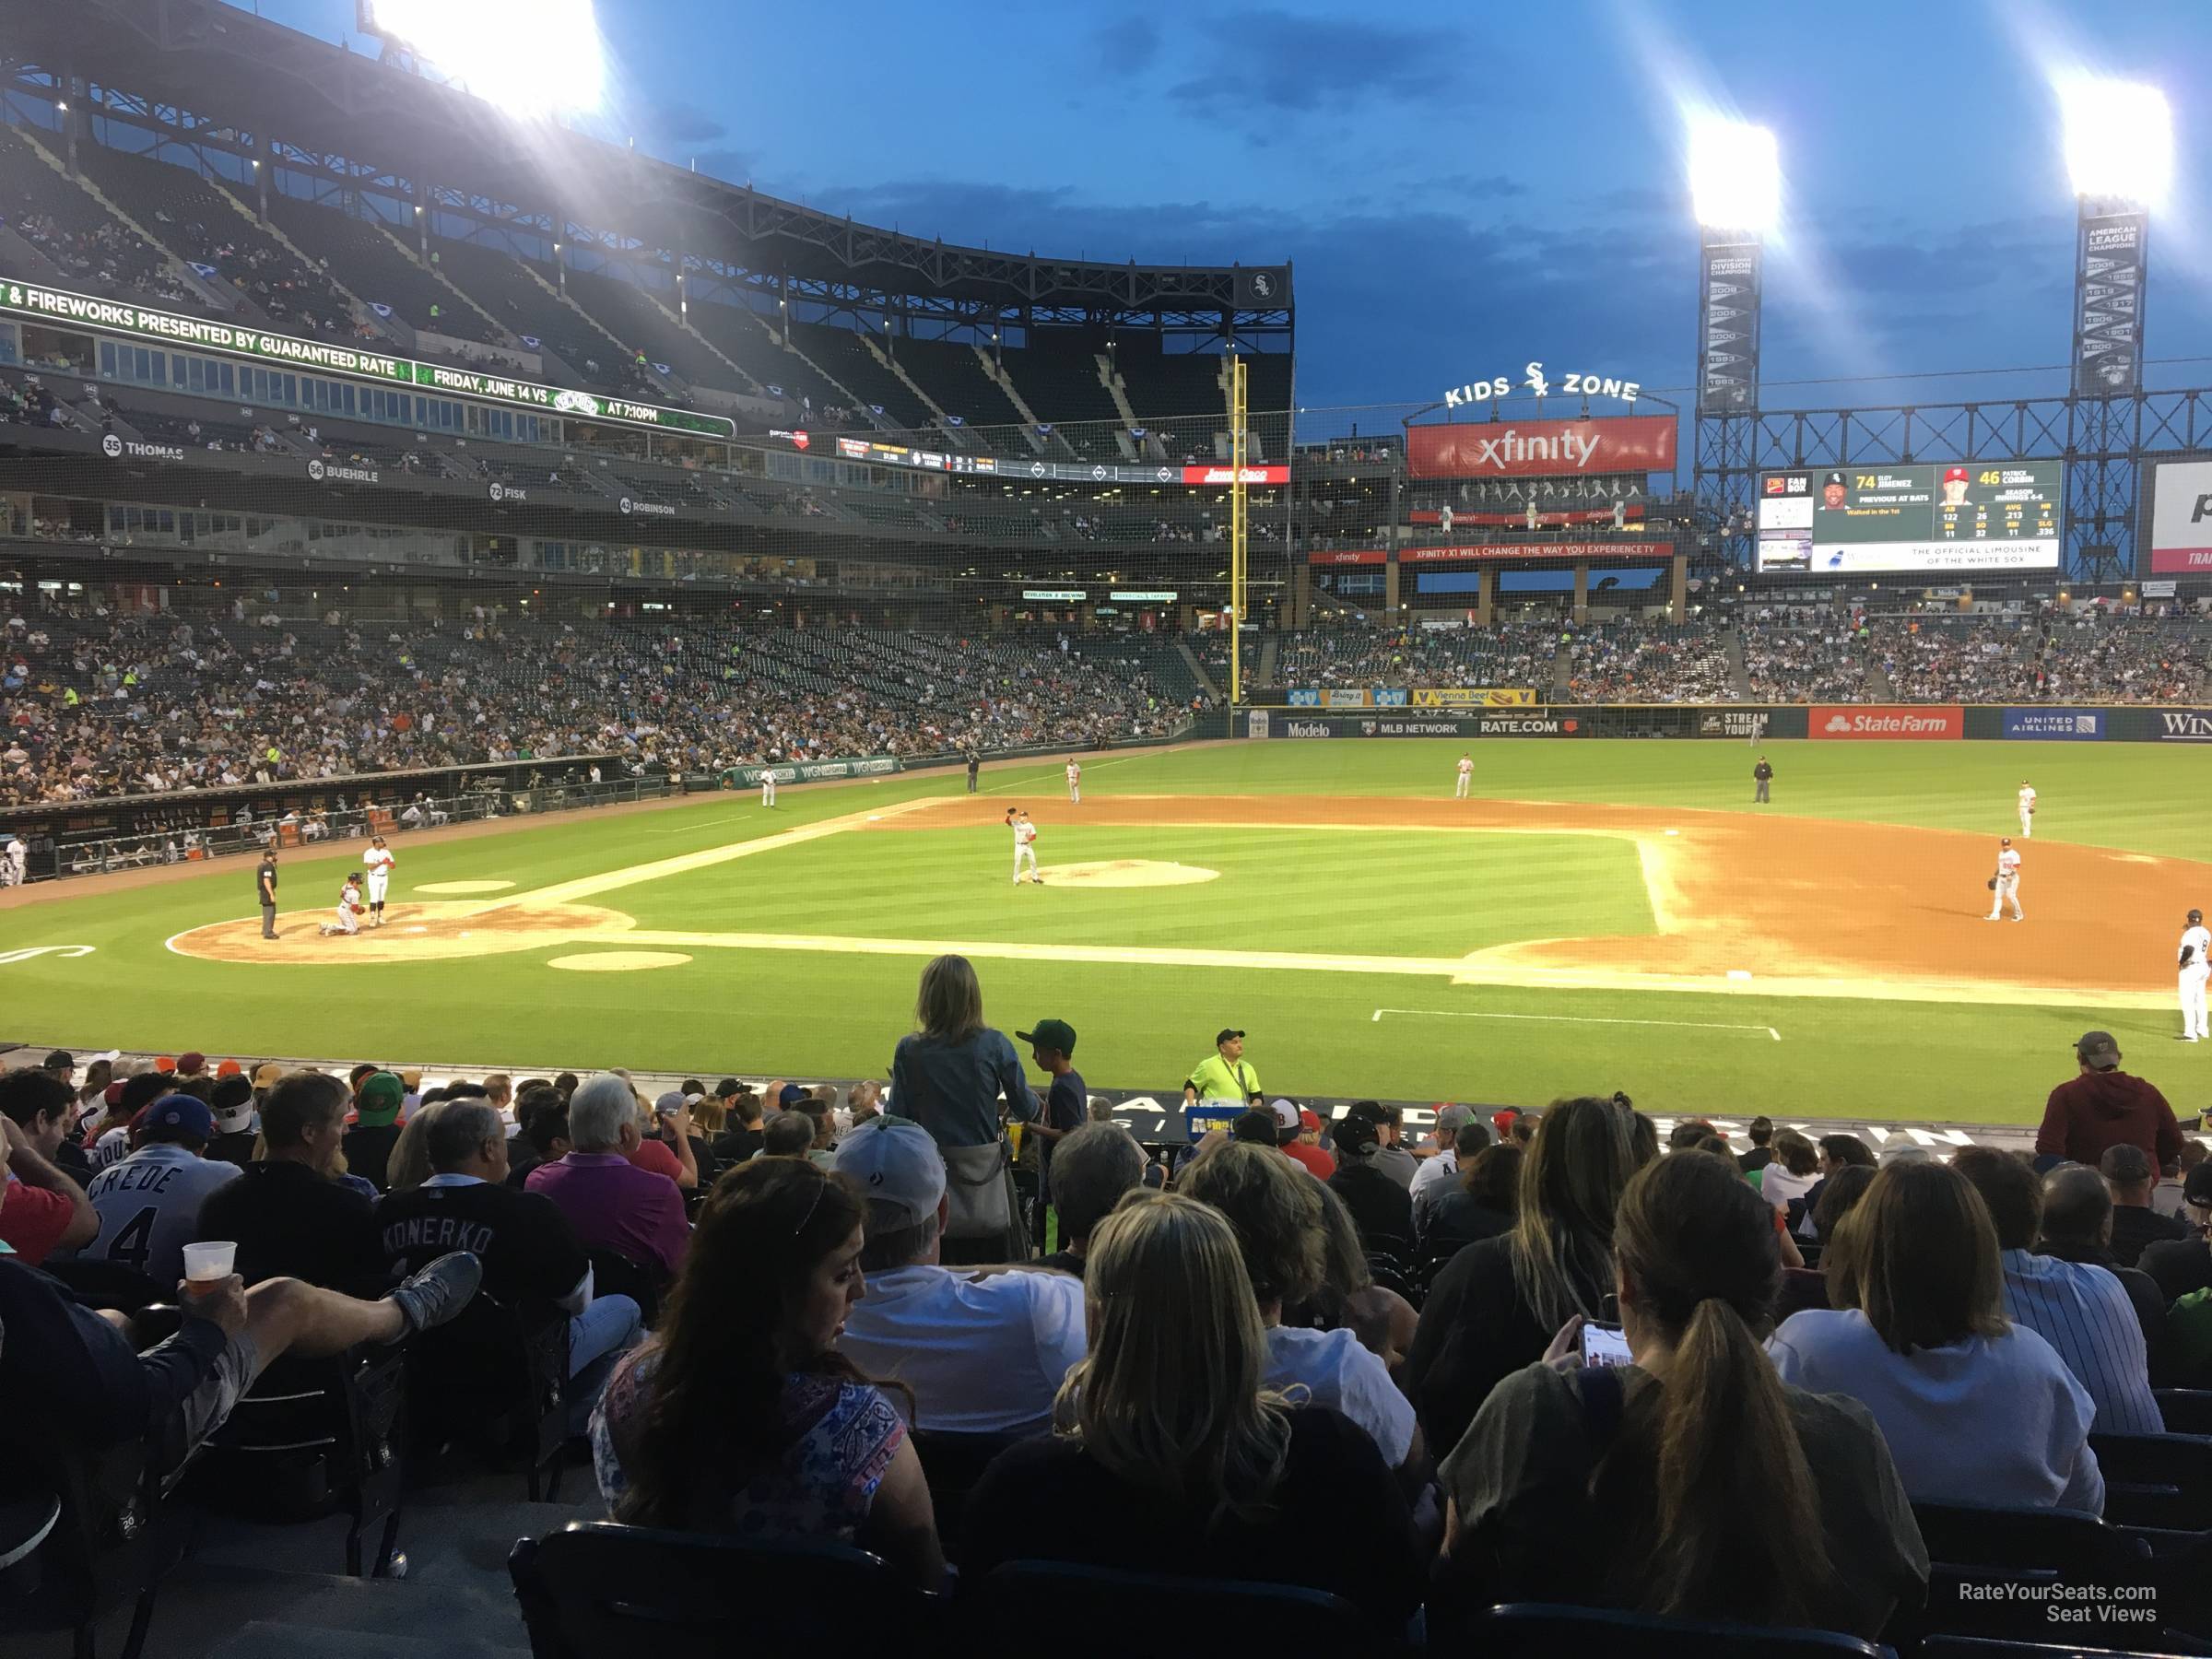 section 124, row 24 seat view  - guaranteed rate field